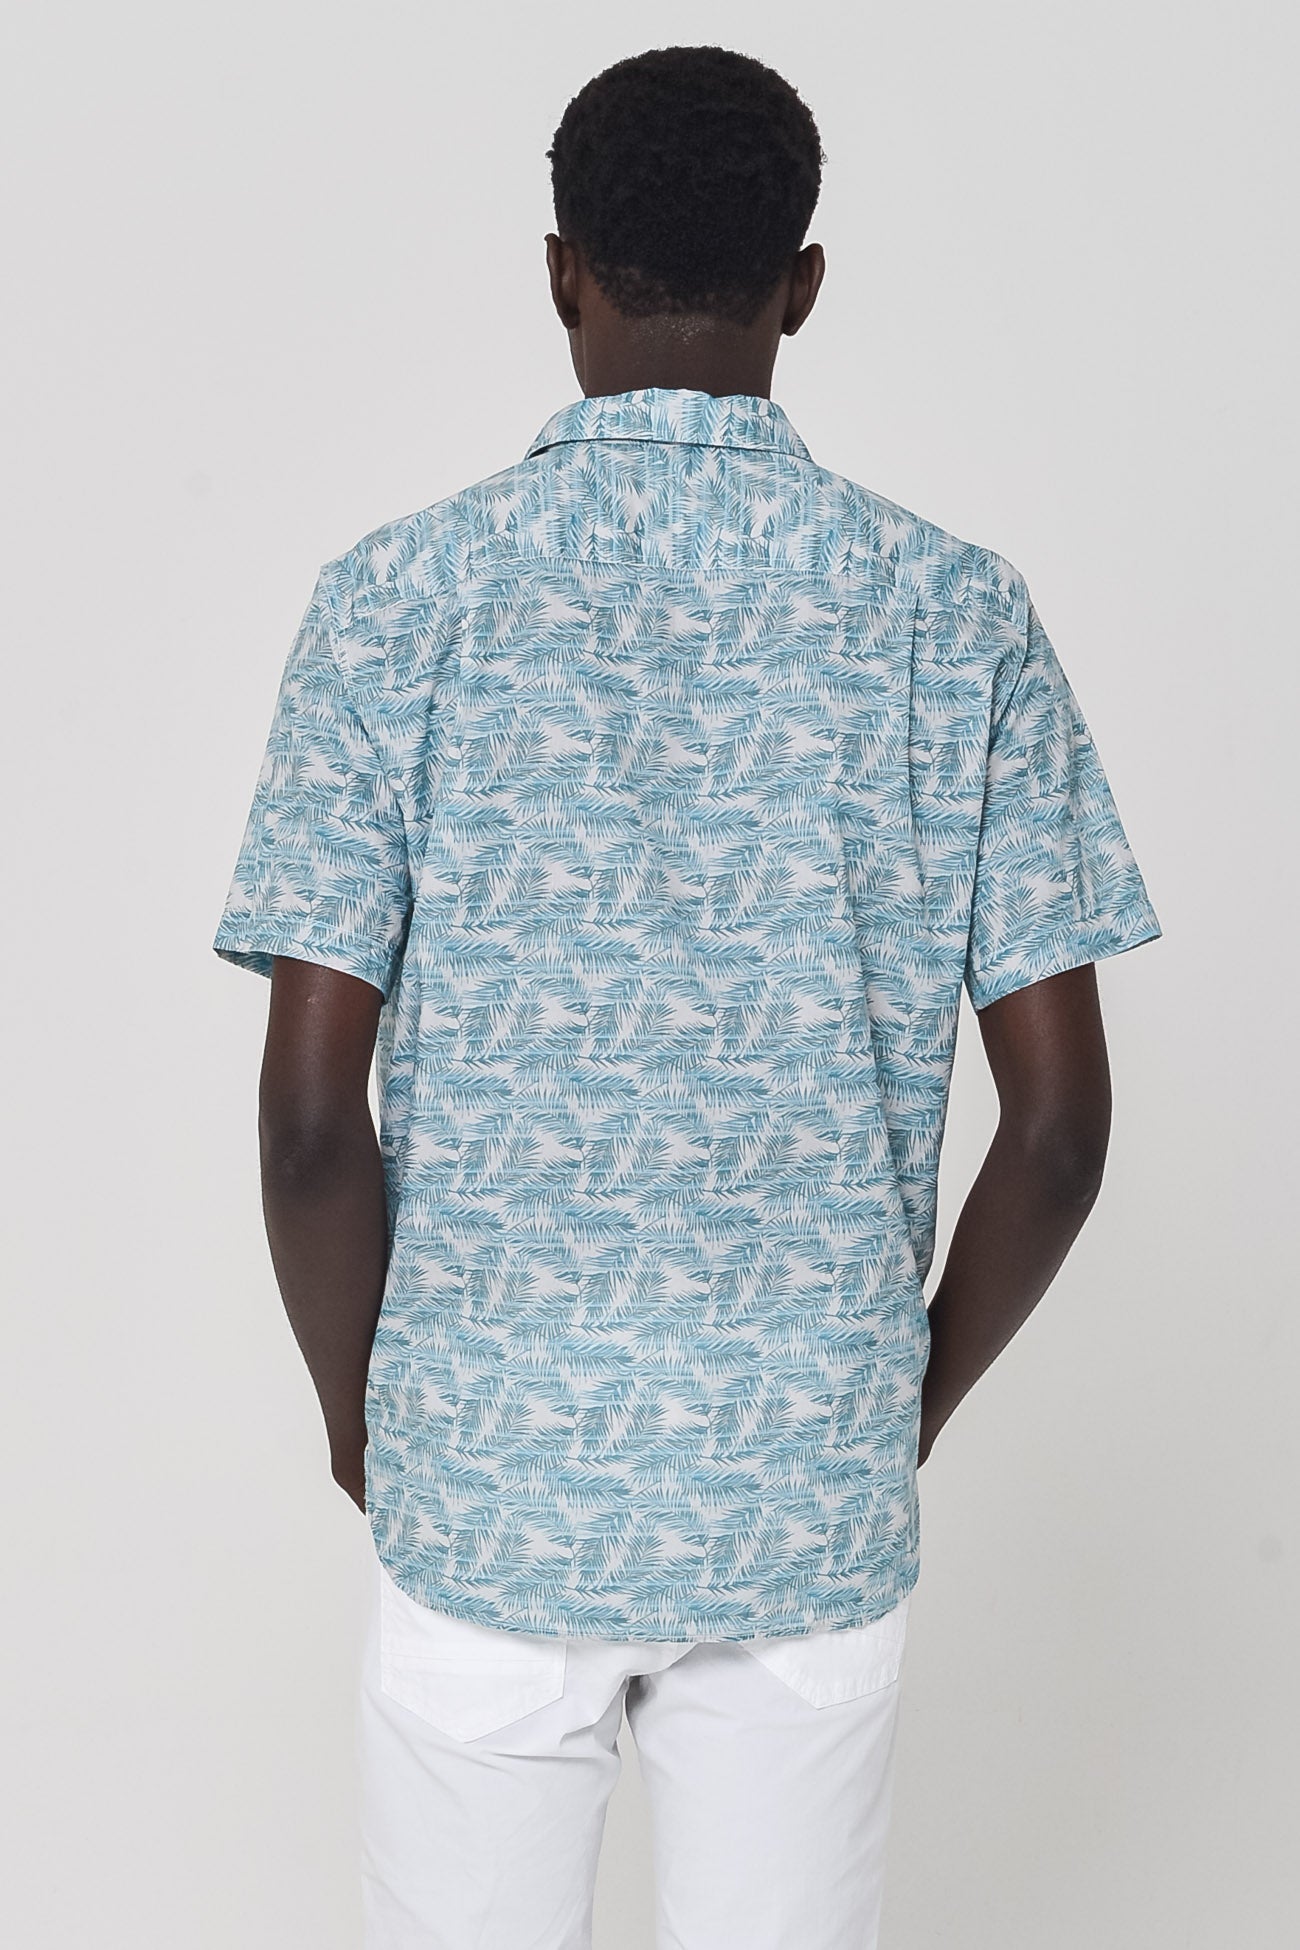 Unisex Voile Shirt in Cycas Print - Shirts